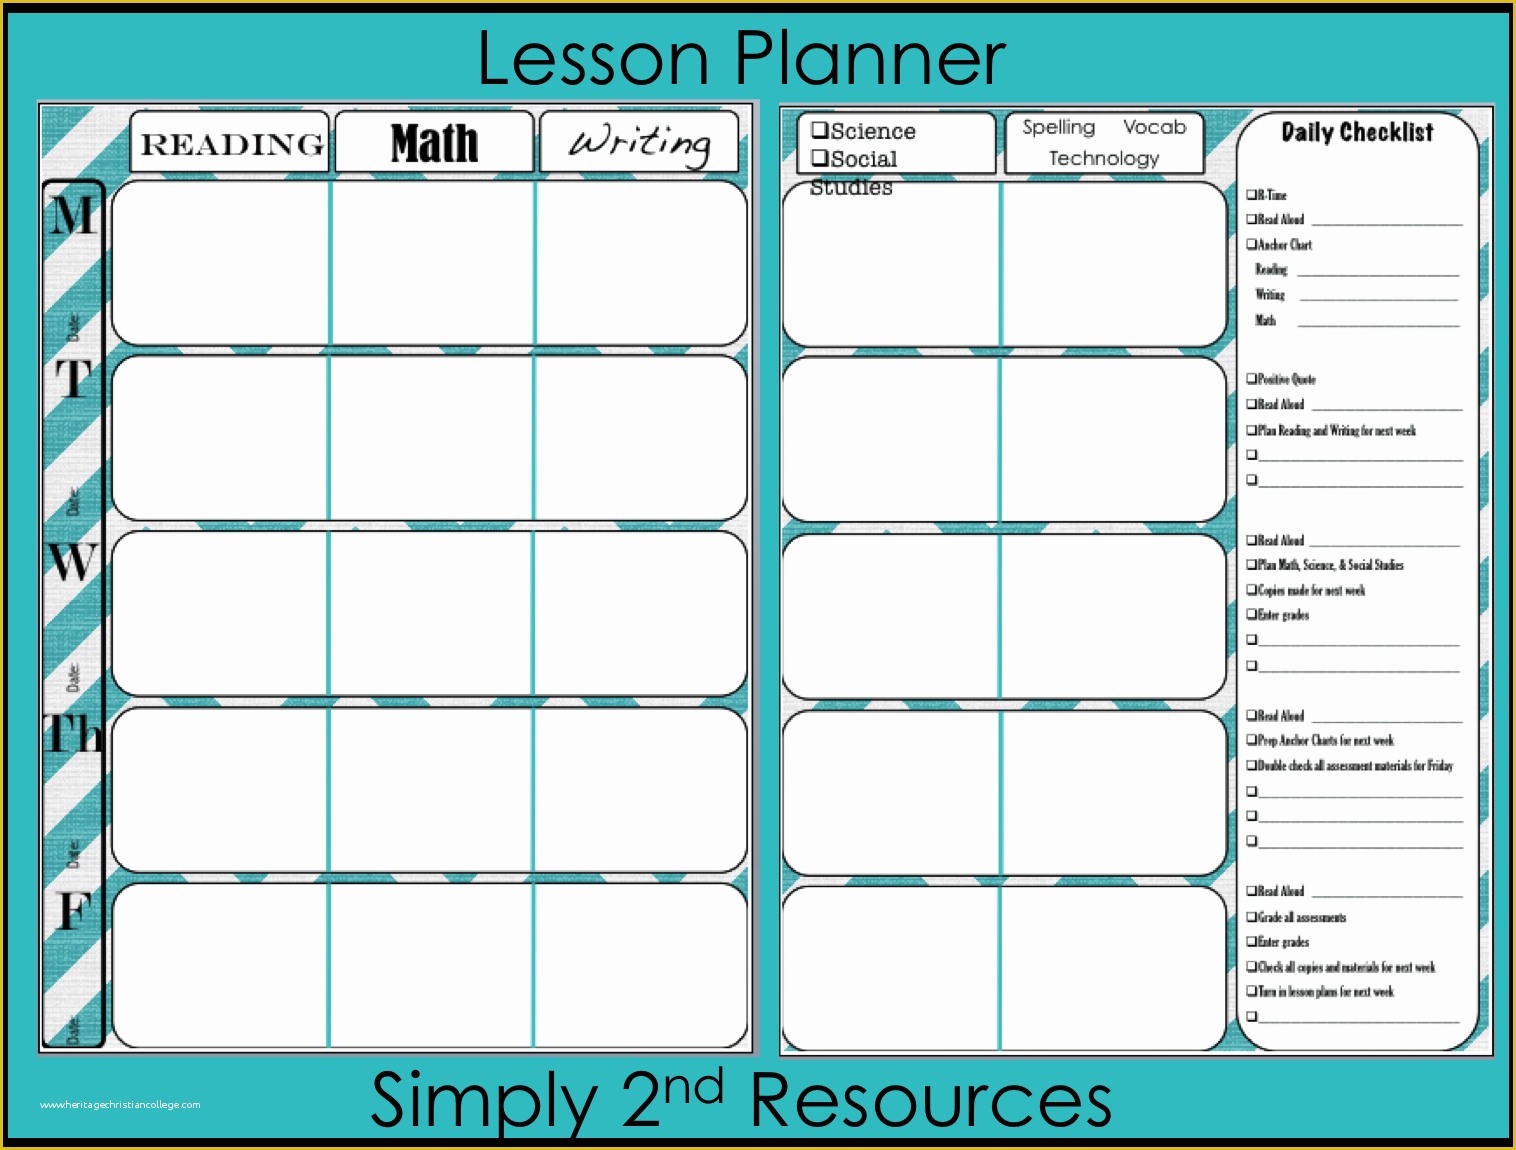 Free Printable Daily Lesson Plan Template Of Simply 2nd Resources Throwback Thursday Linky